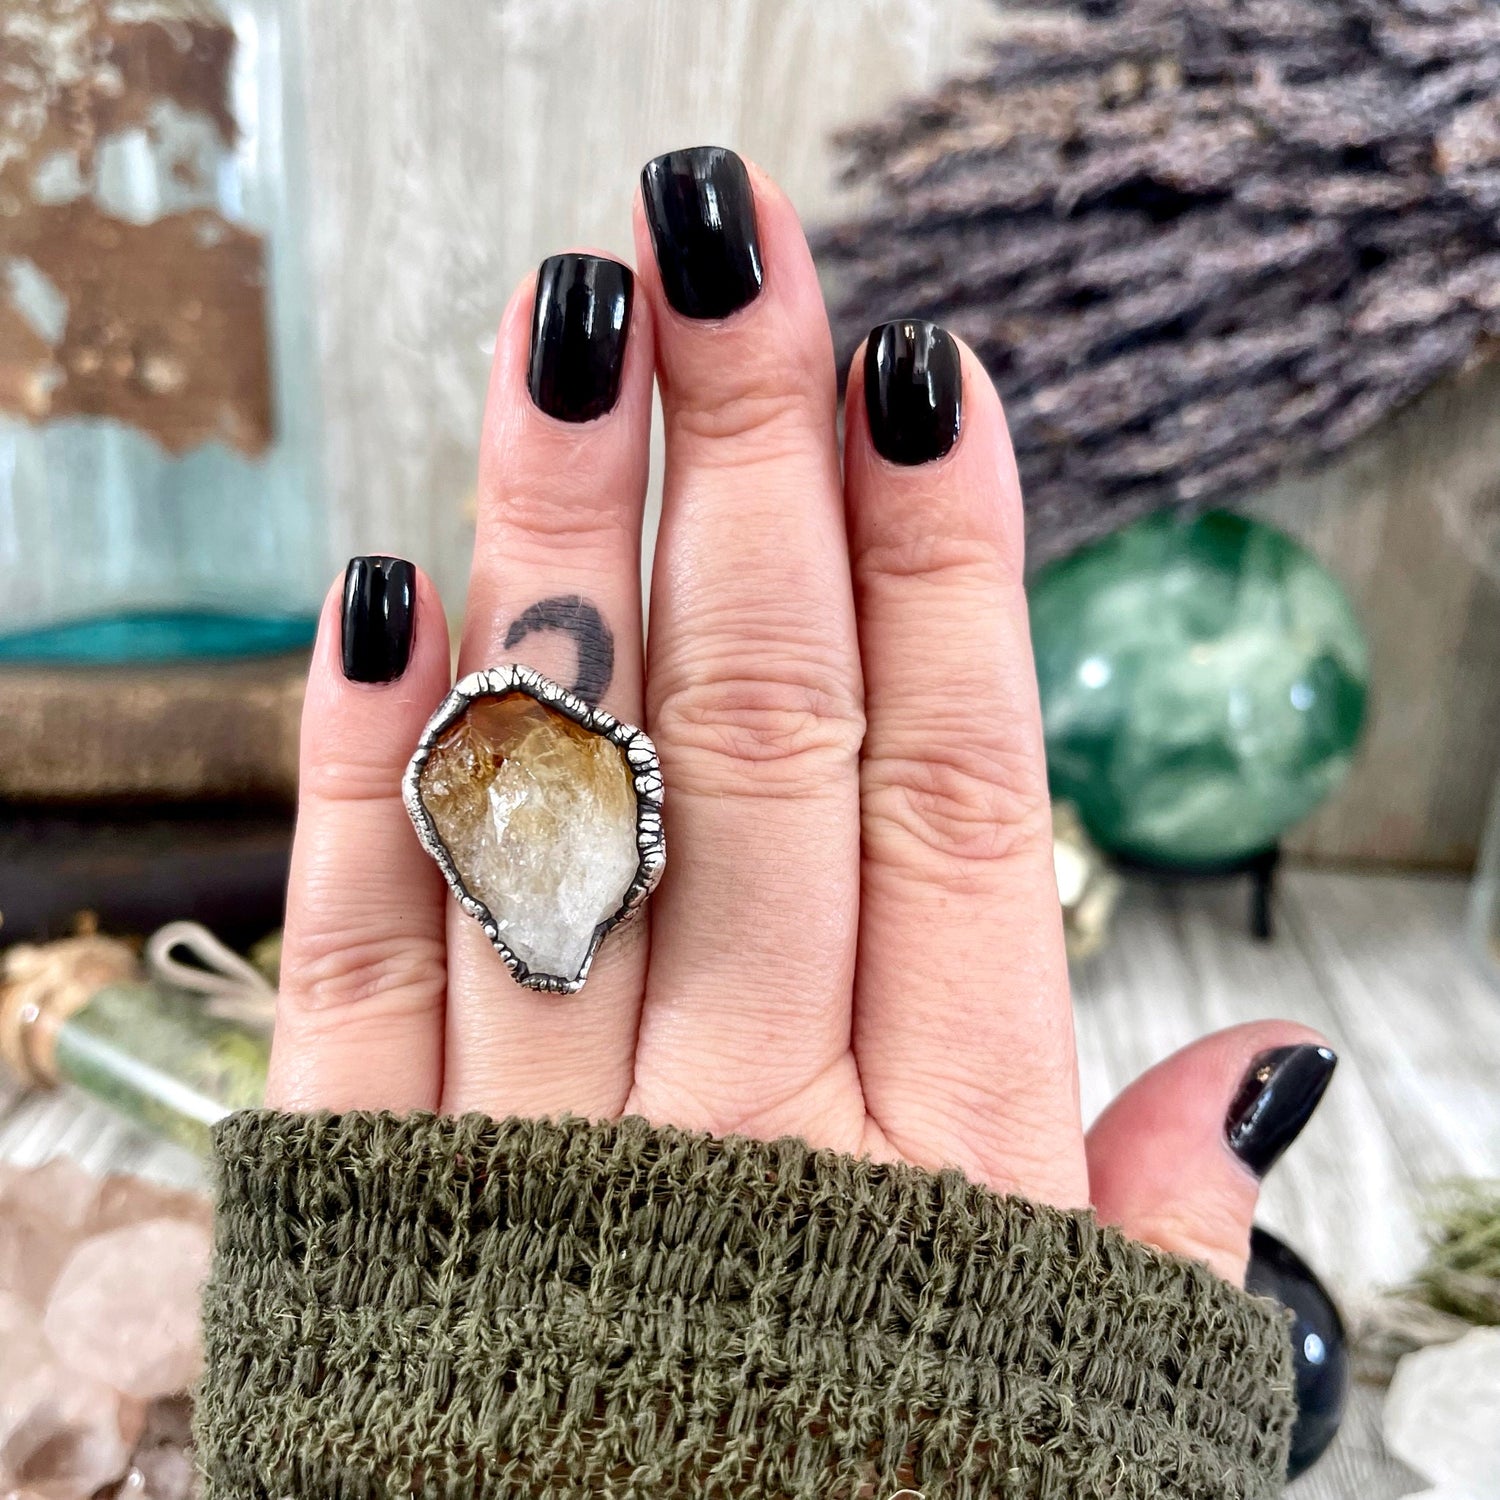 Size 7 Raw Citrine Crystal Point Ring Set in Fine Silver / Foxlark Collection - One of a Kind / Big Crystal Ring Witchy Jewelry